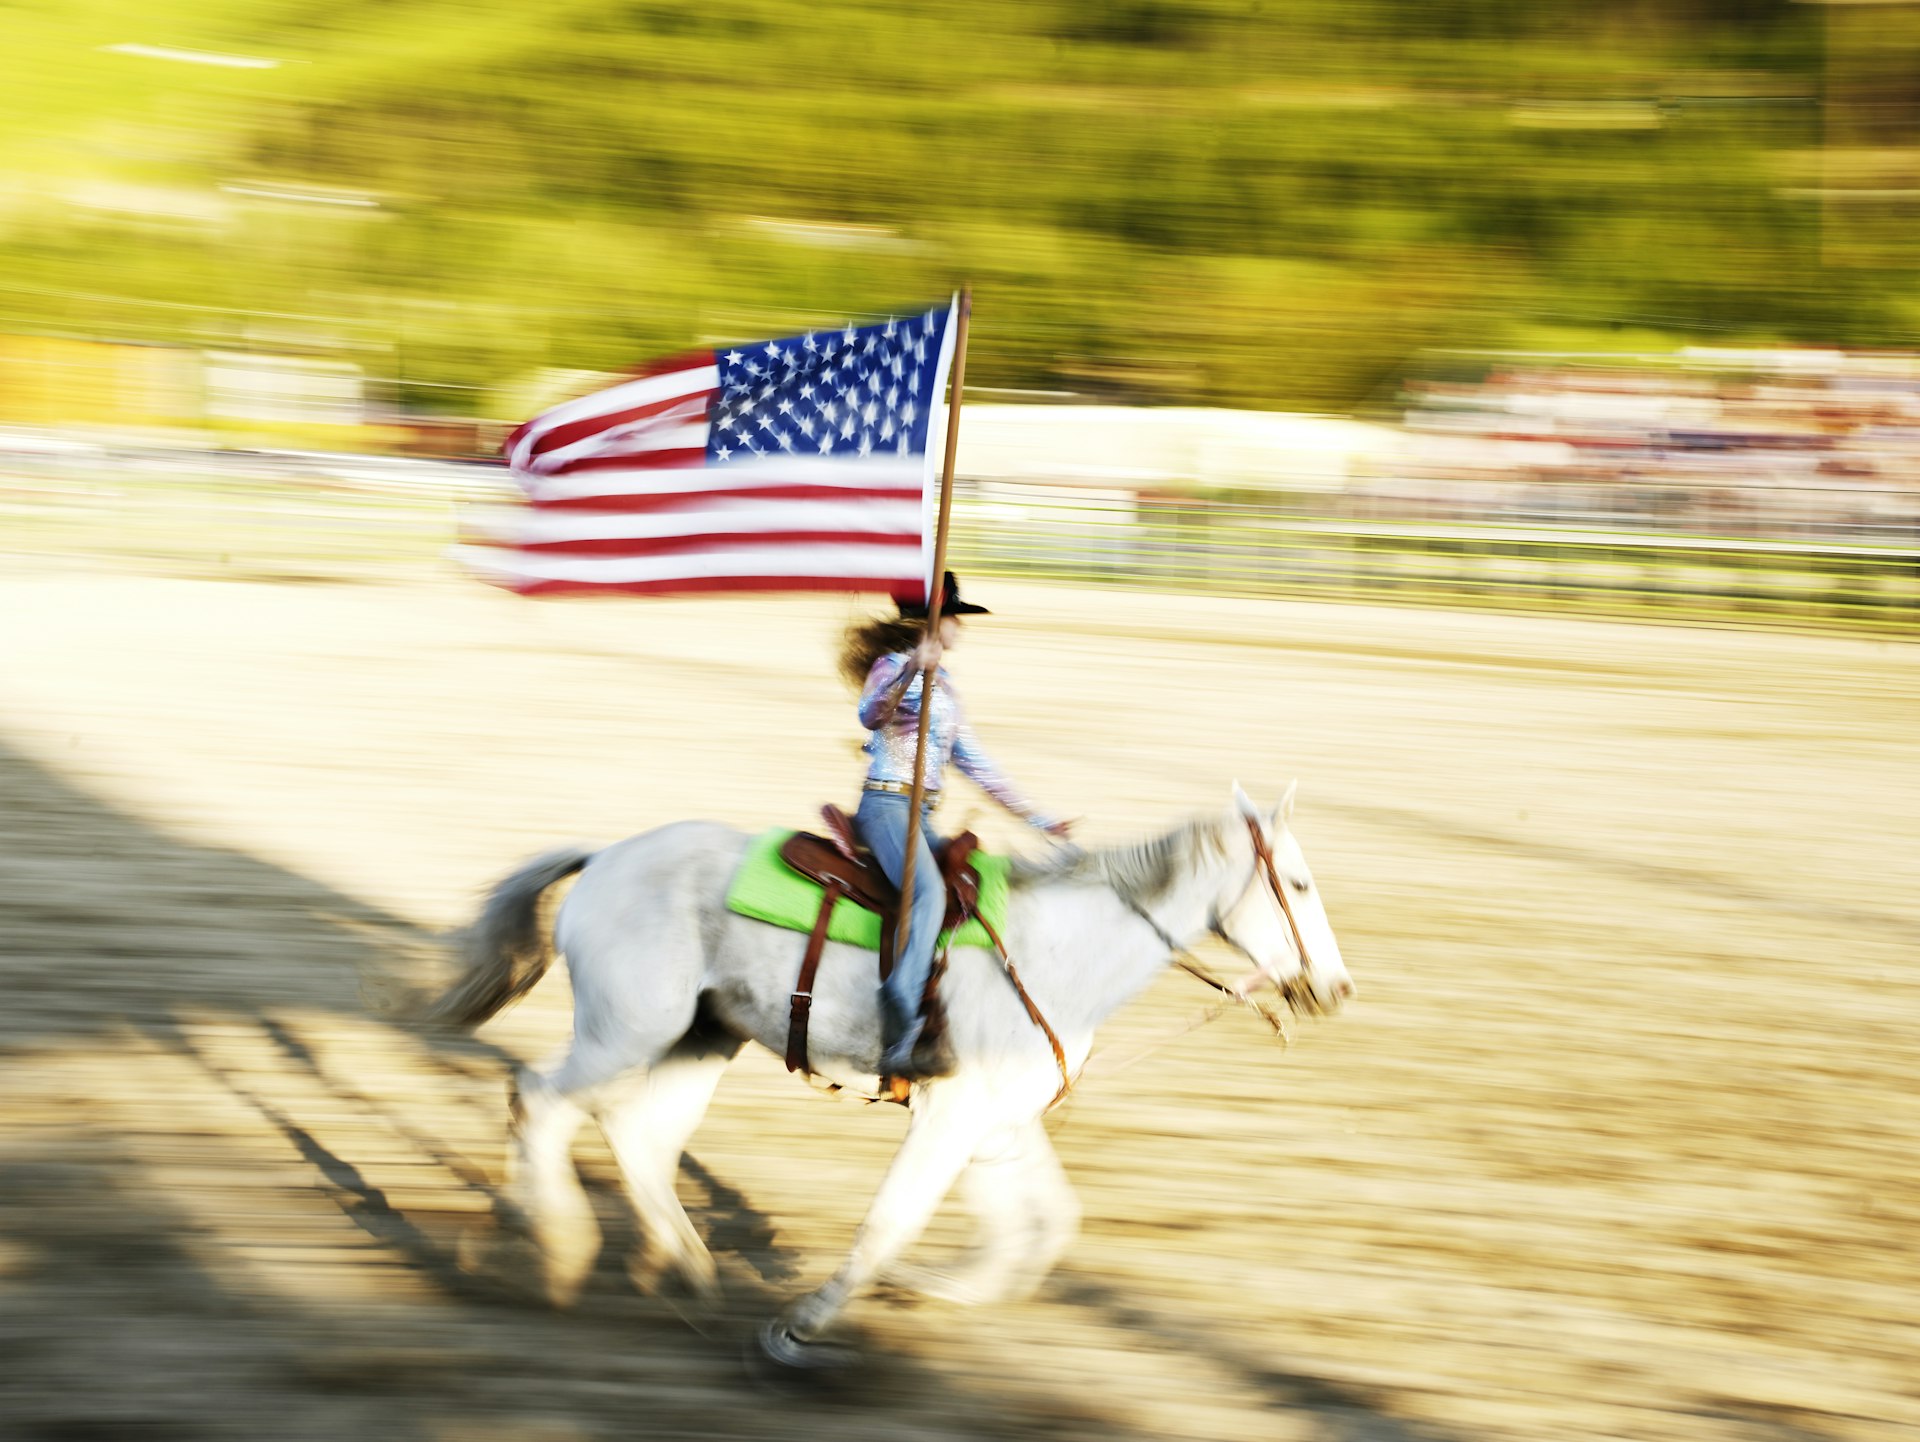 Woman carrying American flag on horseback at rodeo